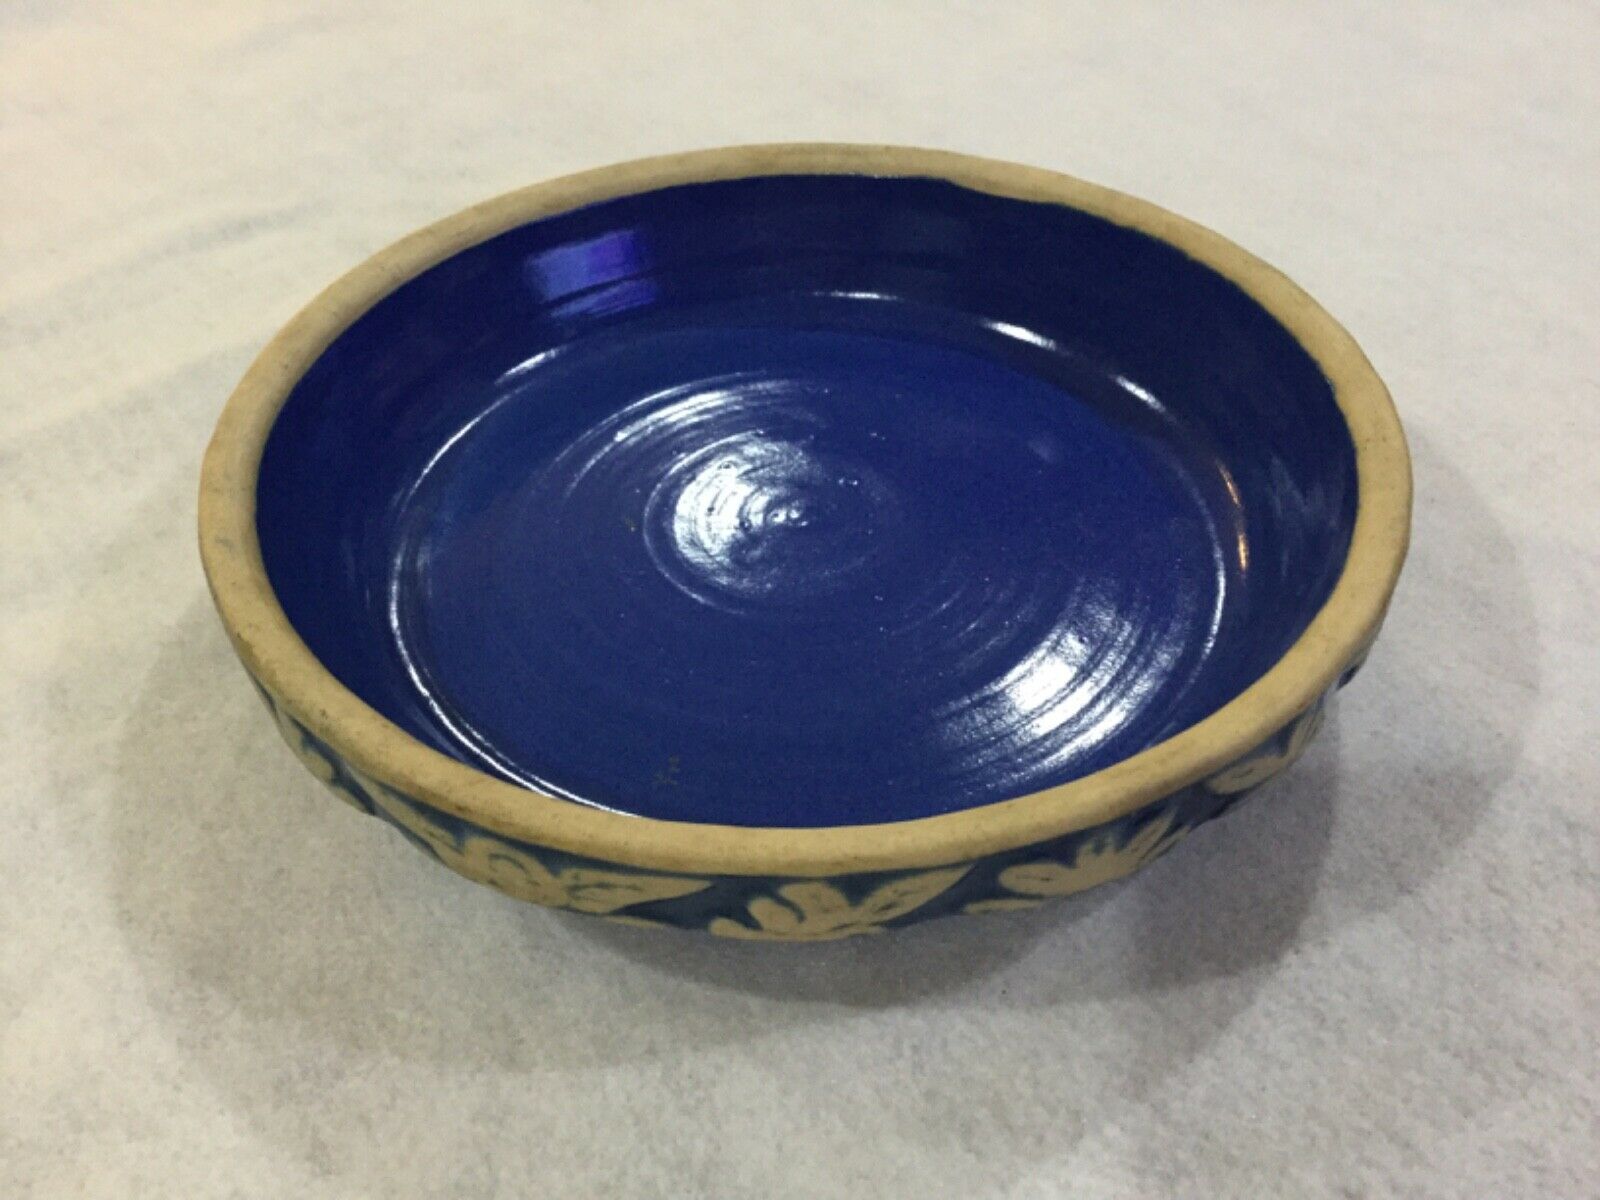 Cobalt Blue Pie Plate By Clay City Pottery Marked "10" On The Bottom